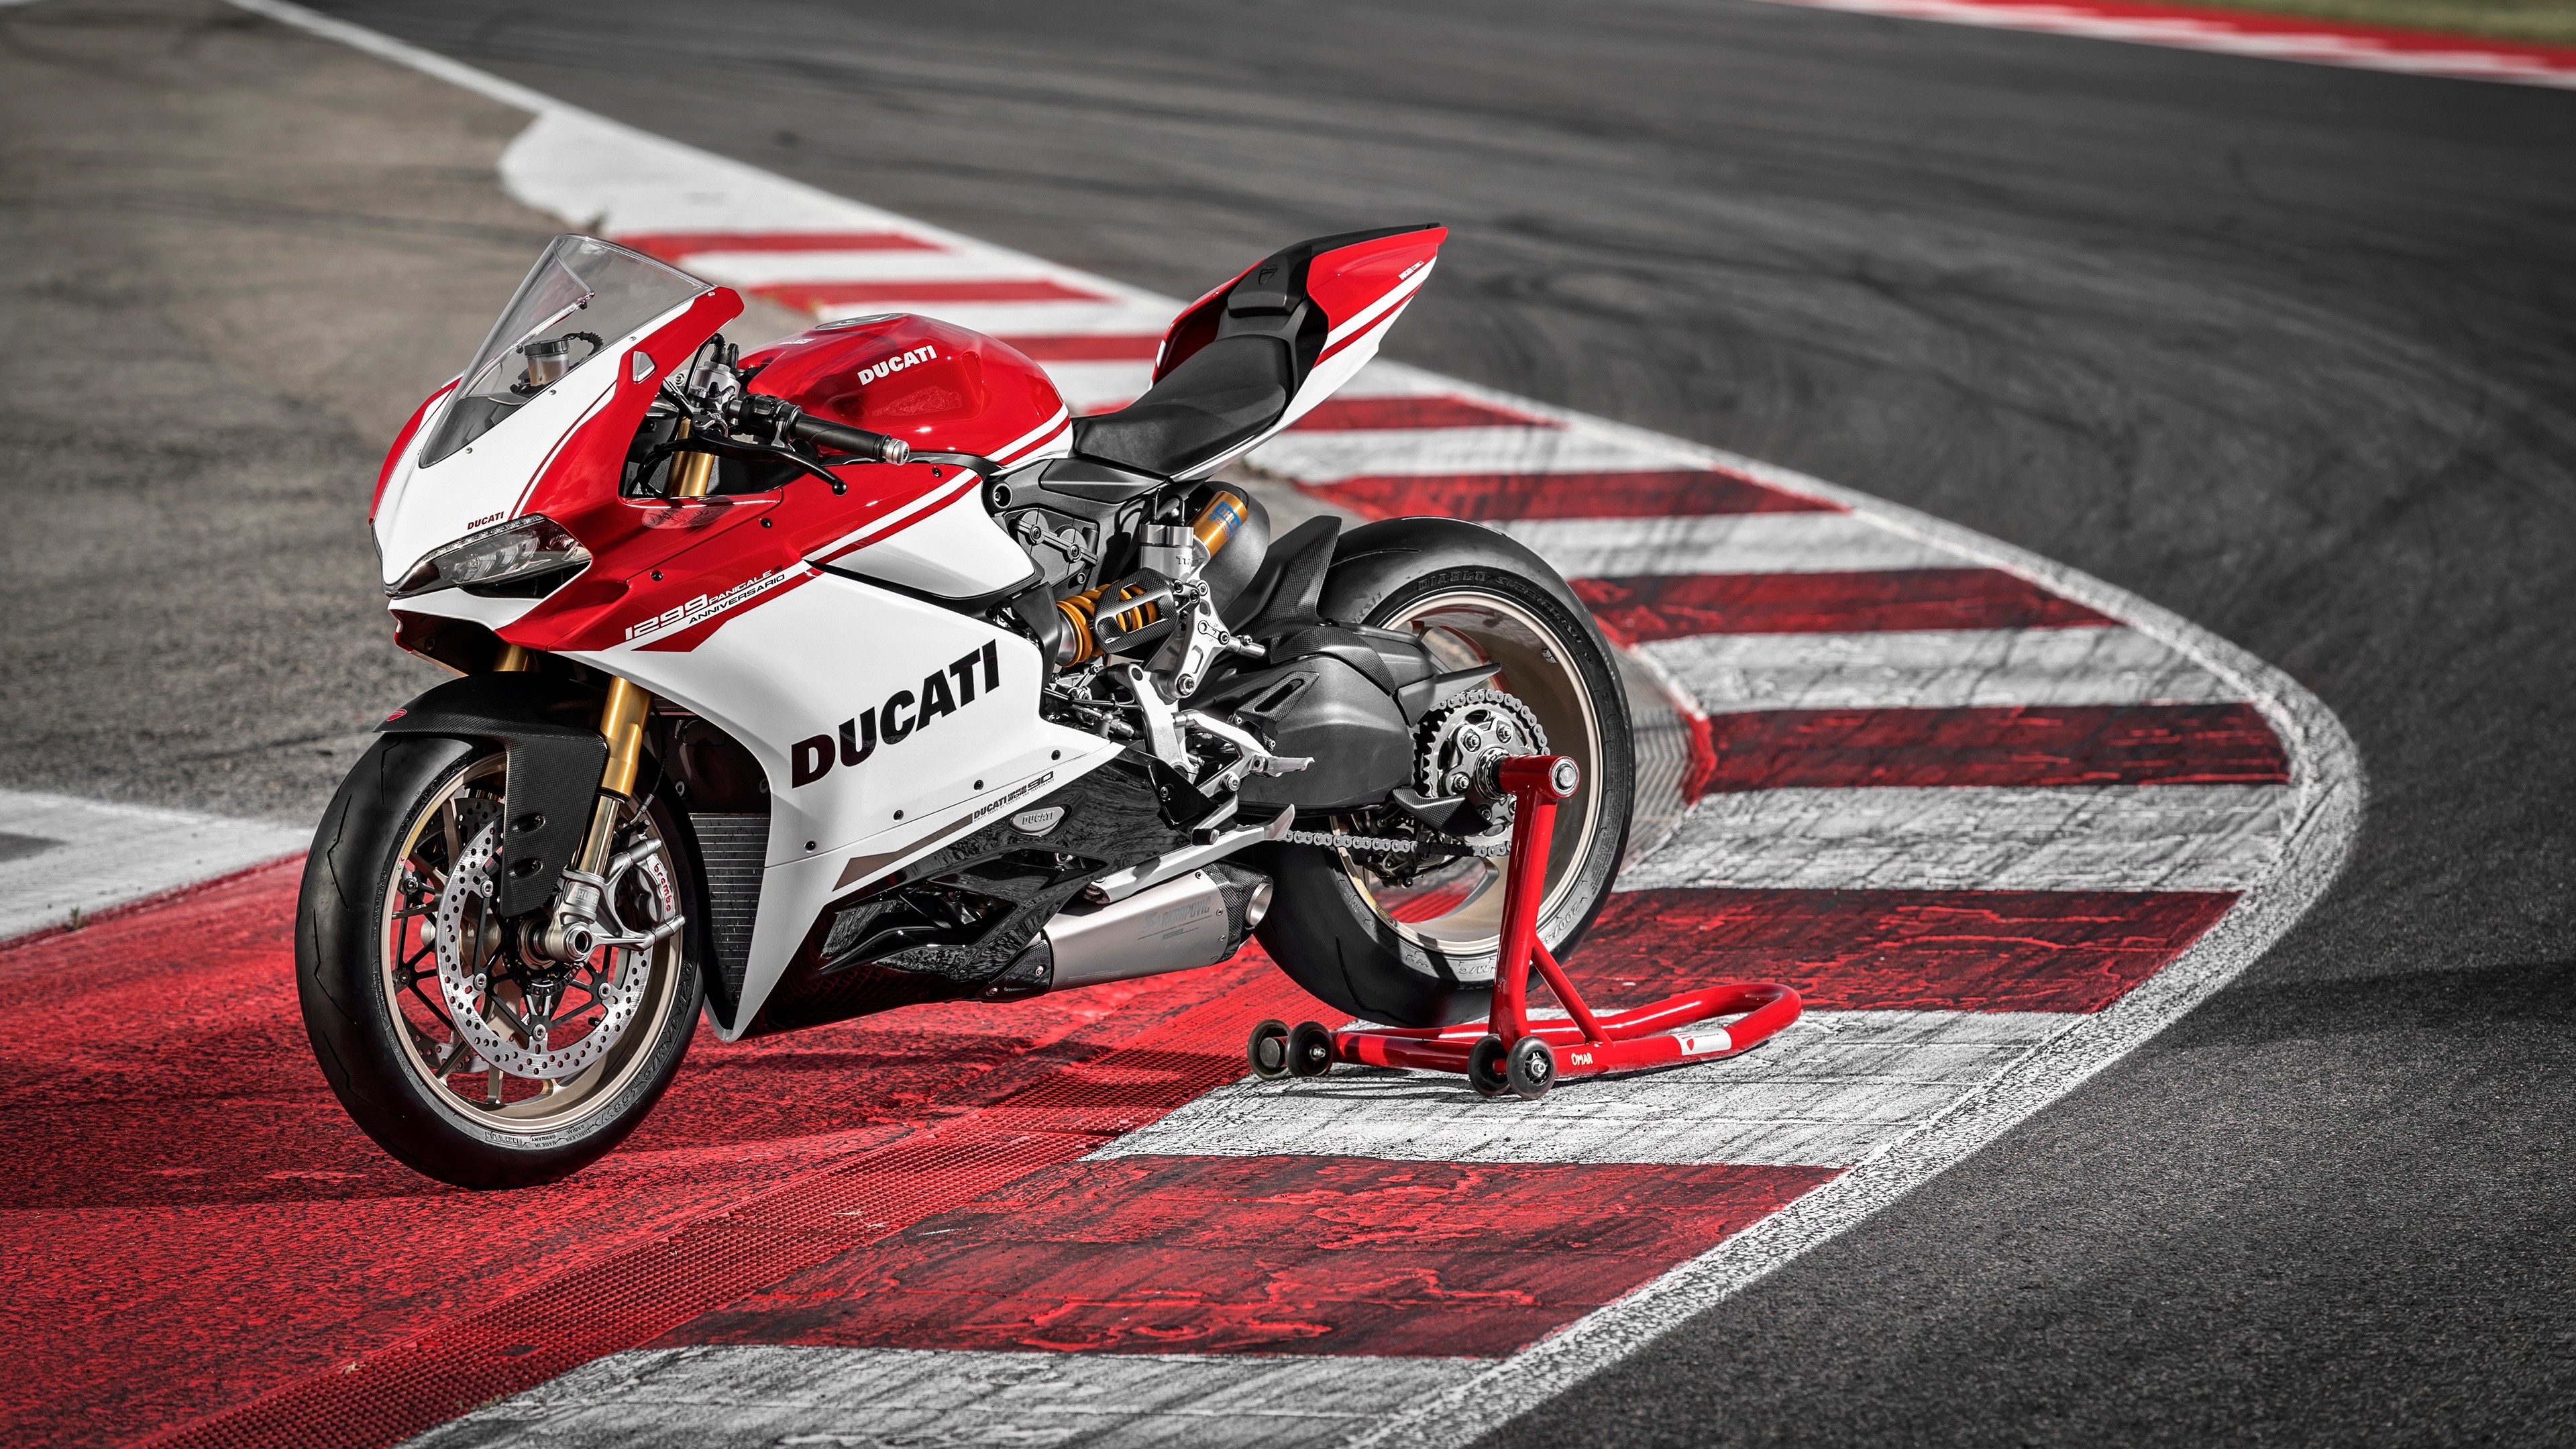 Ducati Superbike Racing Race Motorclyes Race Tracks Racer Vehicle Motorcycle Brembo Ohlins Panigale  3840x2160